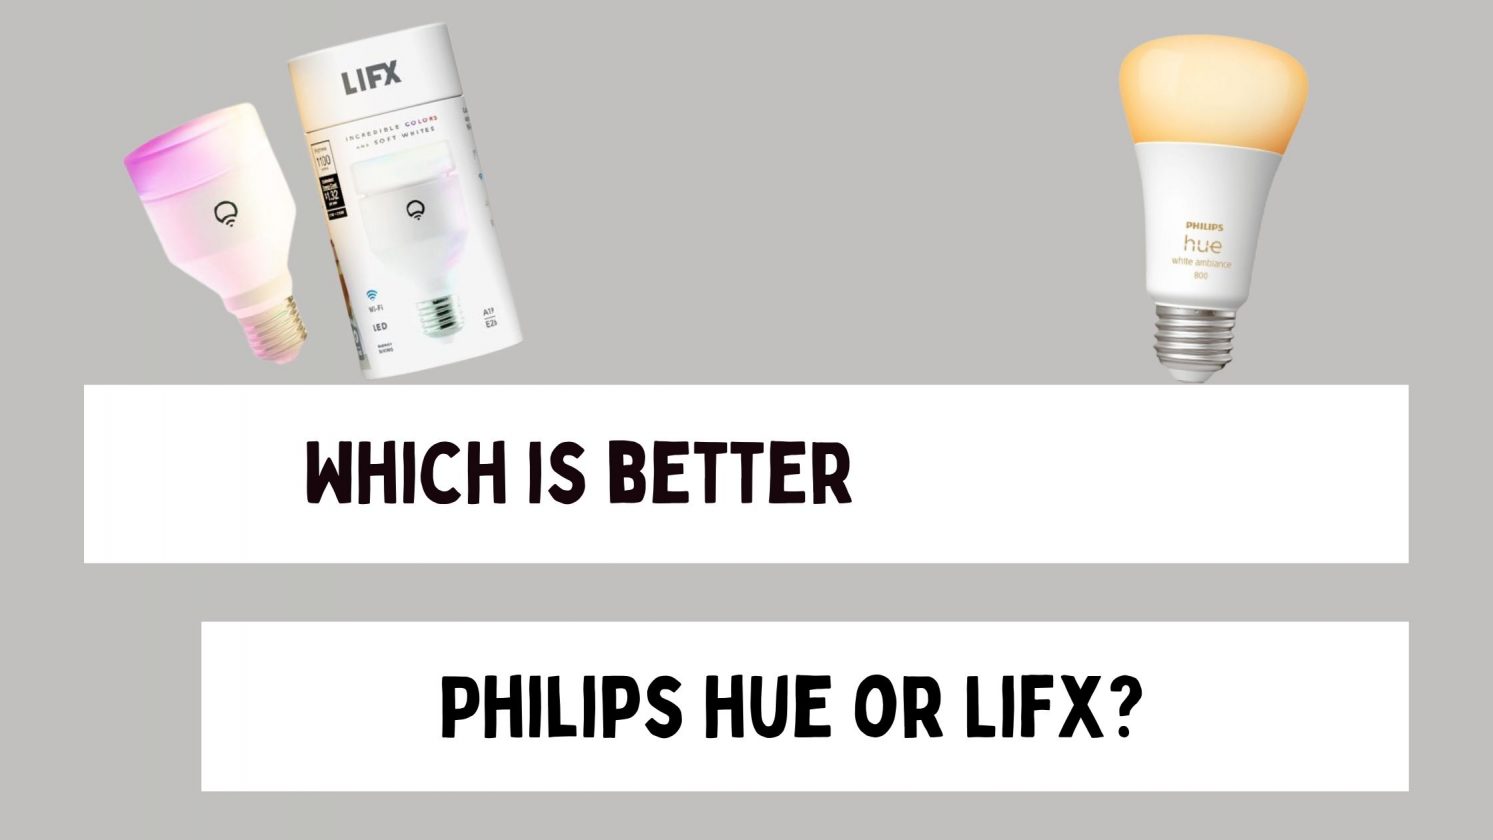 Which is better Philips hue or Lifx?